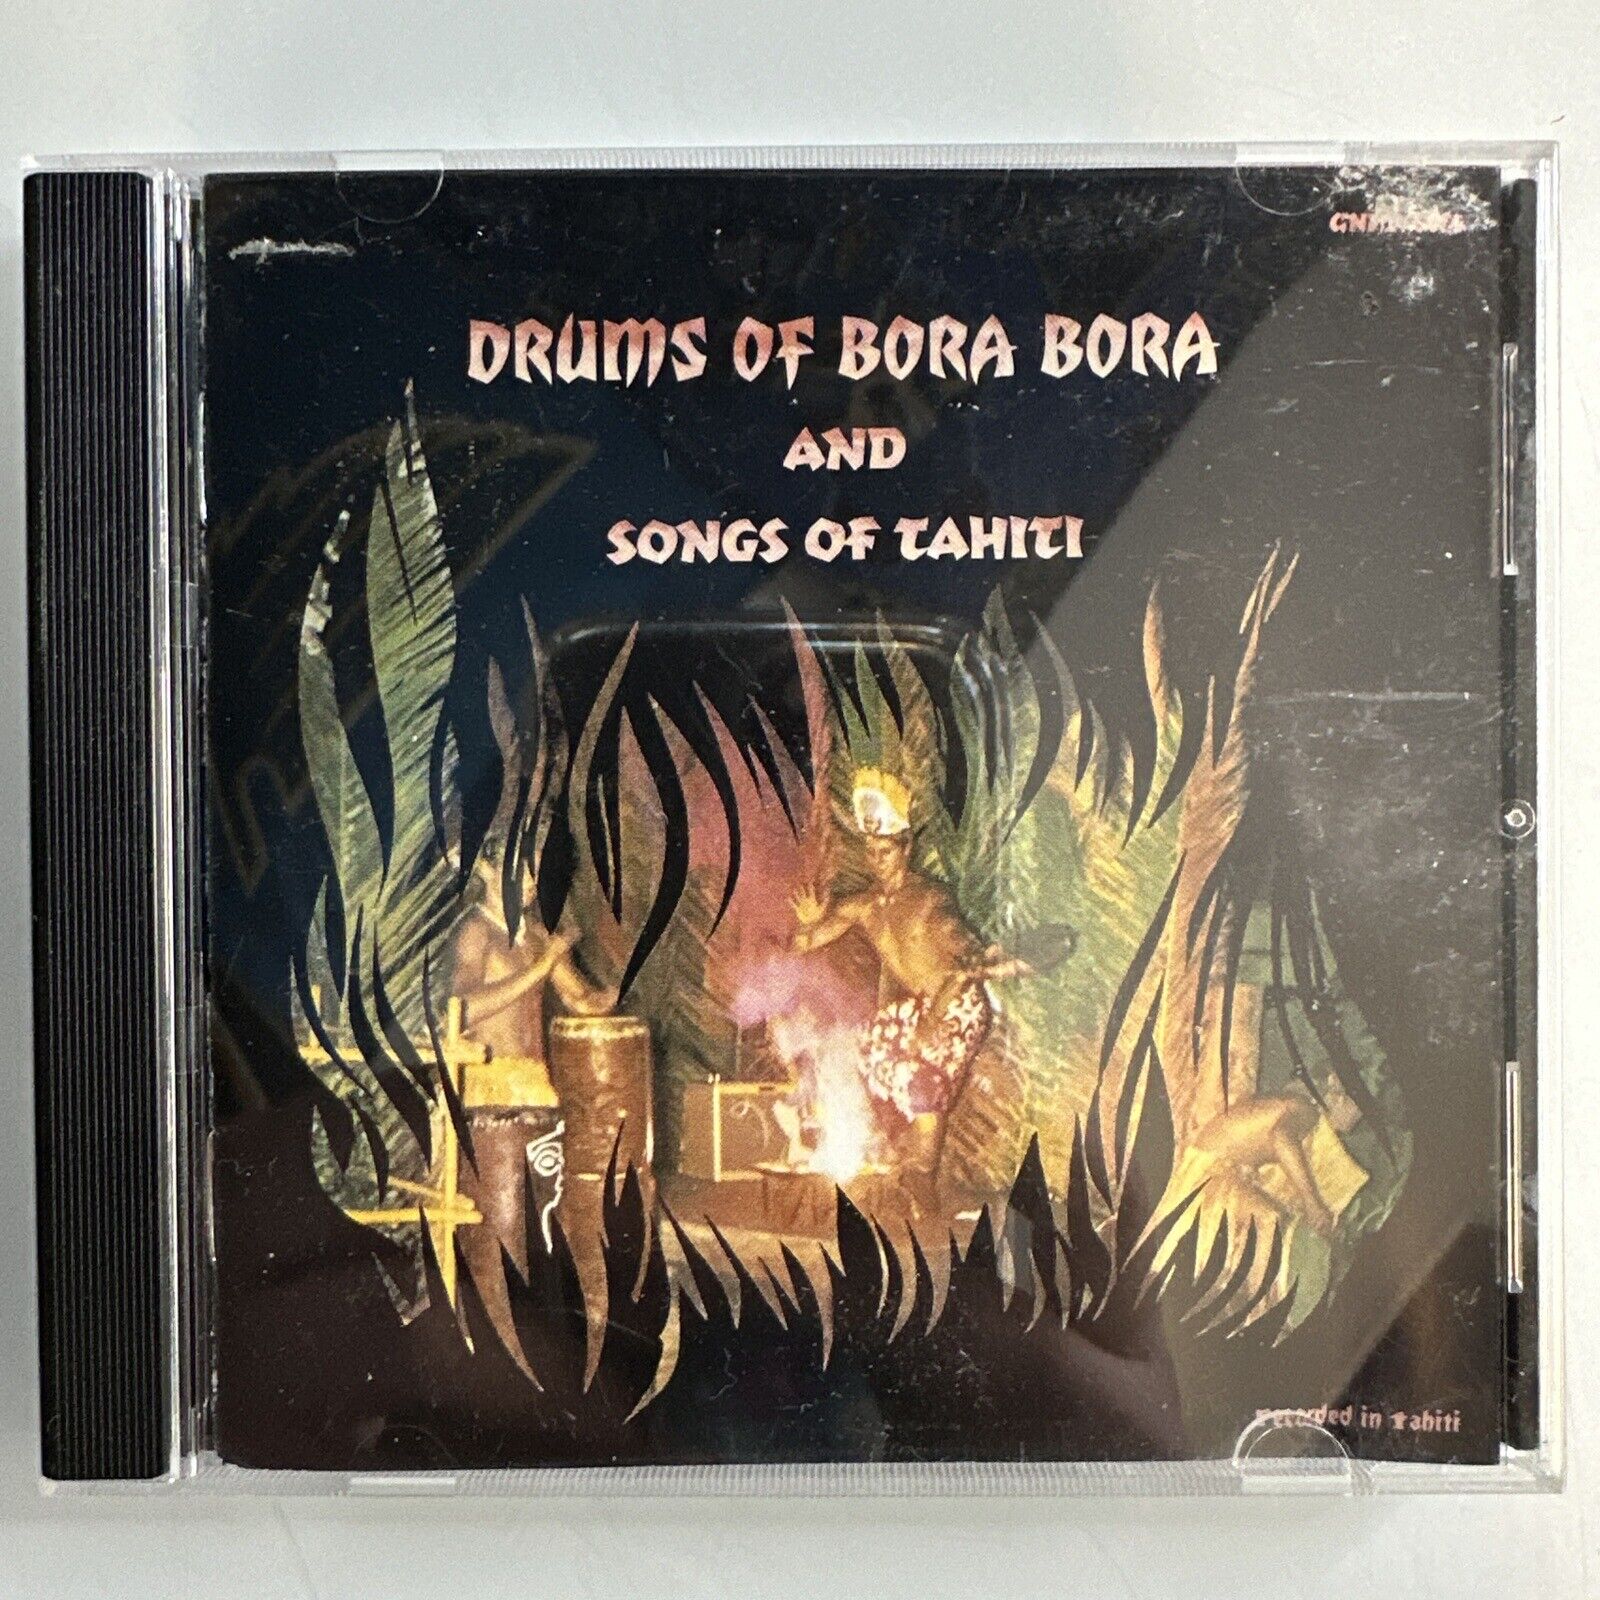 The Drums of Bora Bora by Various Artists (CD, Aug-1993, GNP/Crescendo)